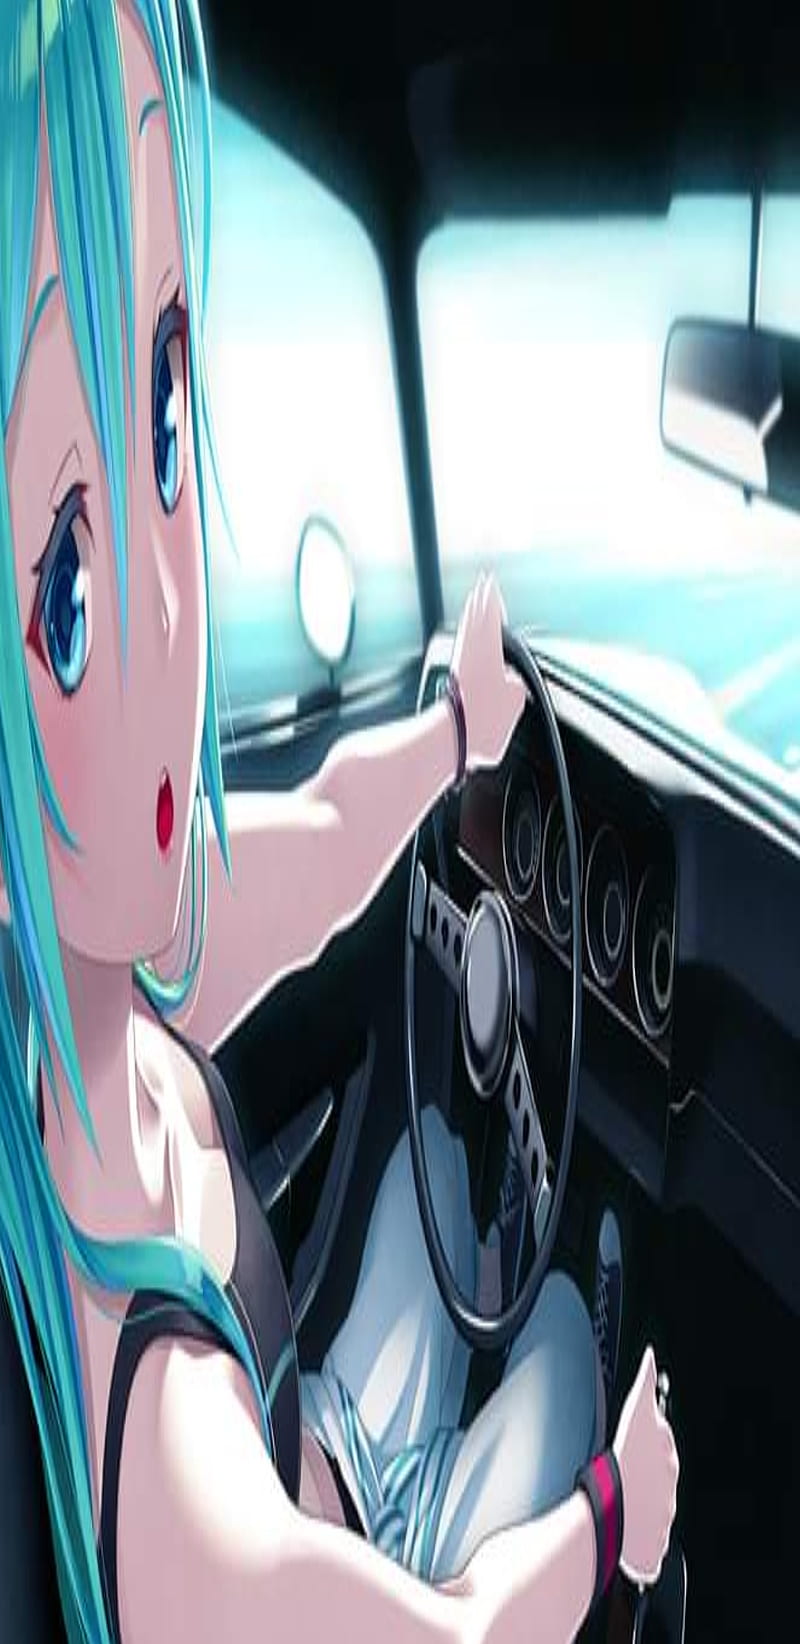 Top more than 59 anime wheel spinner best - awesomeenglish.edu.vn